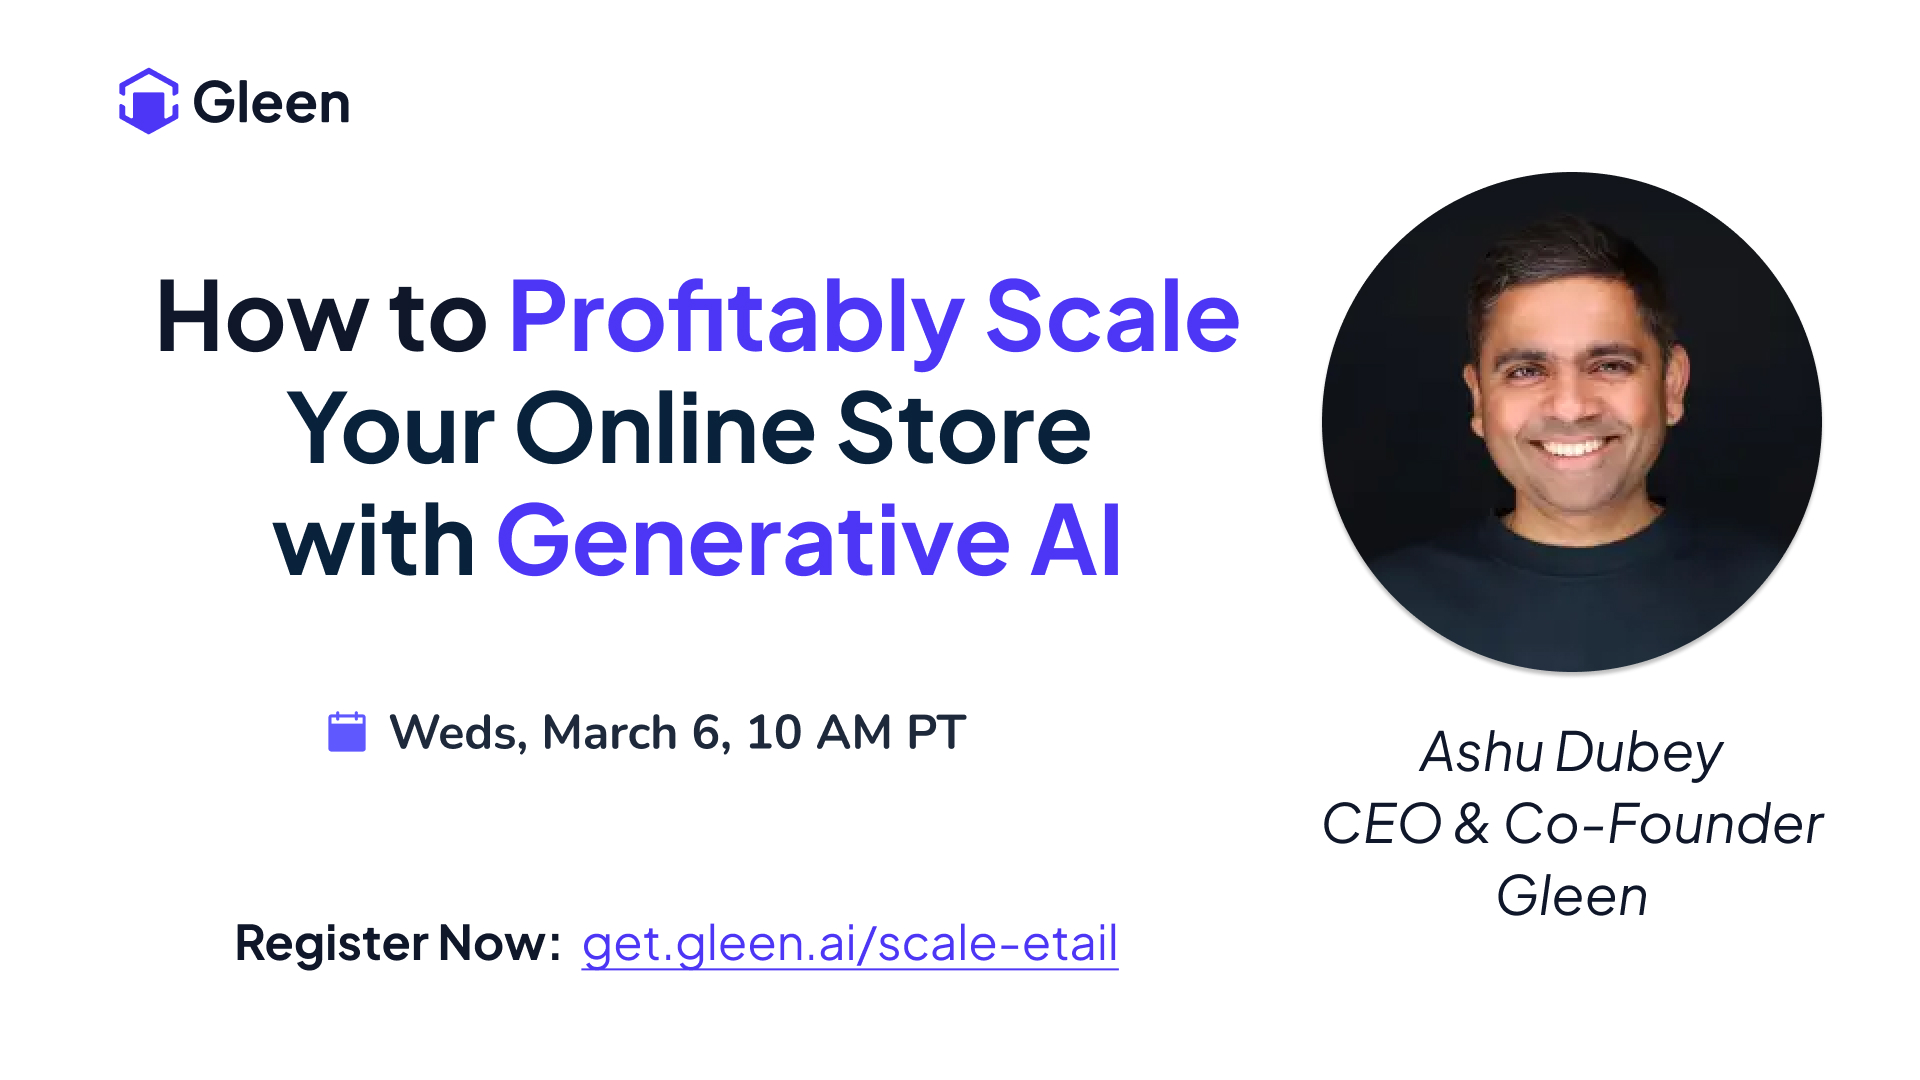 How to Profitably Scale Your Online Store with Generative AI